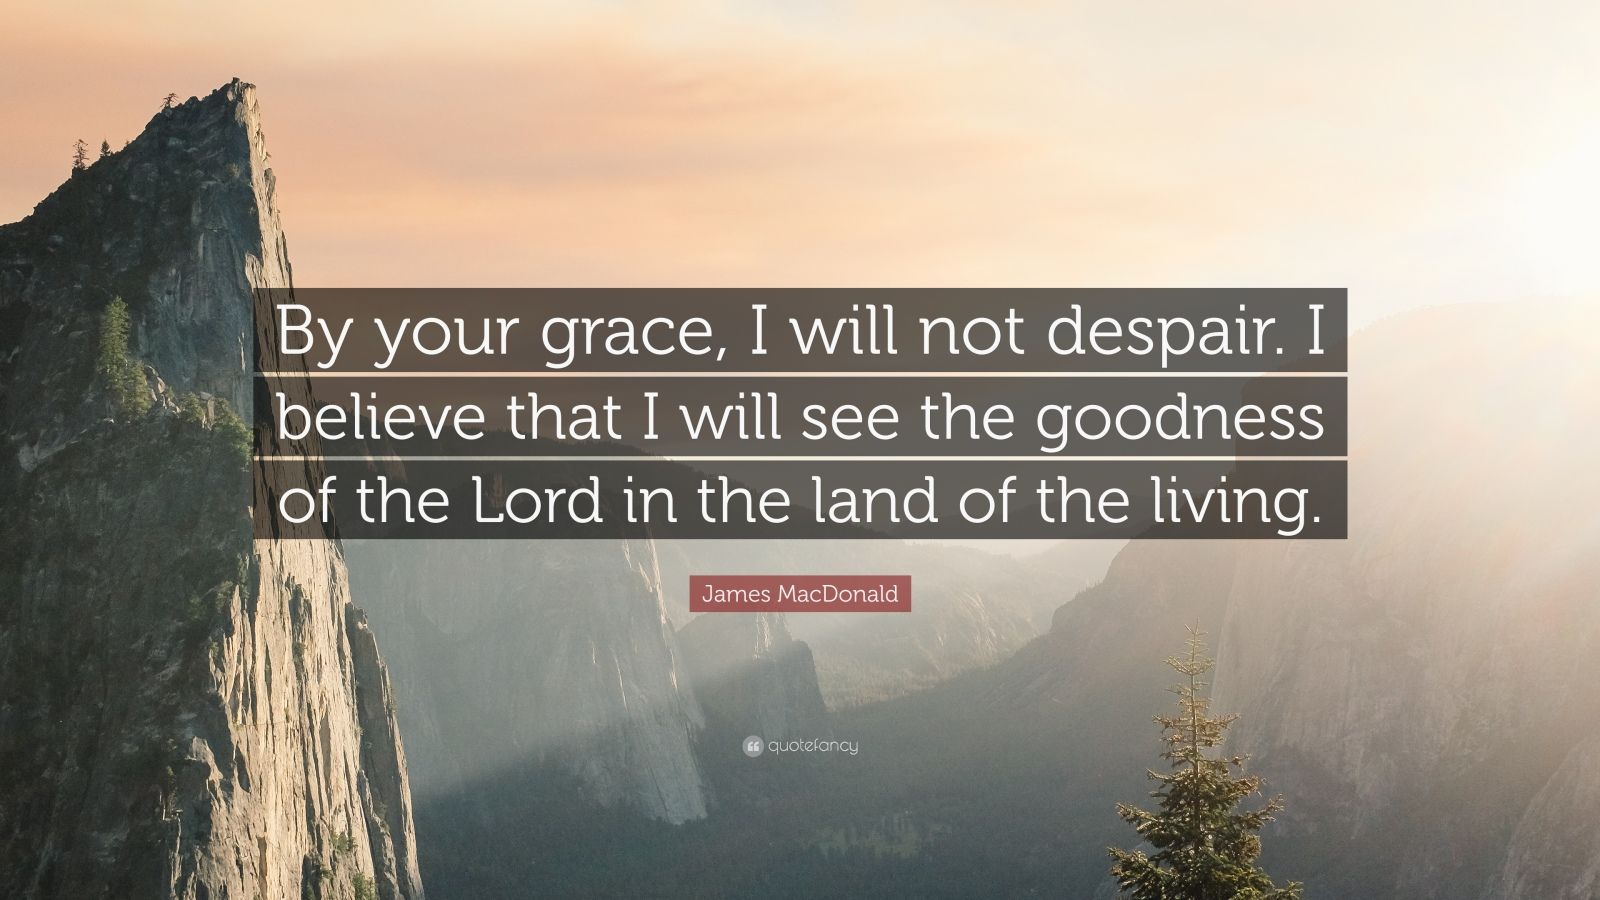 James MacDonald Quote: “By your grace, I will not despair. I believe